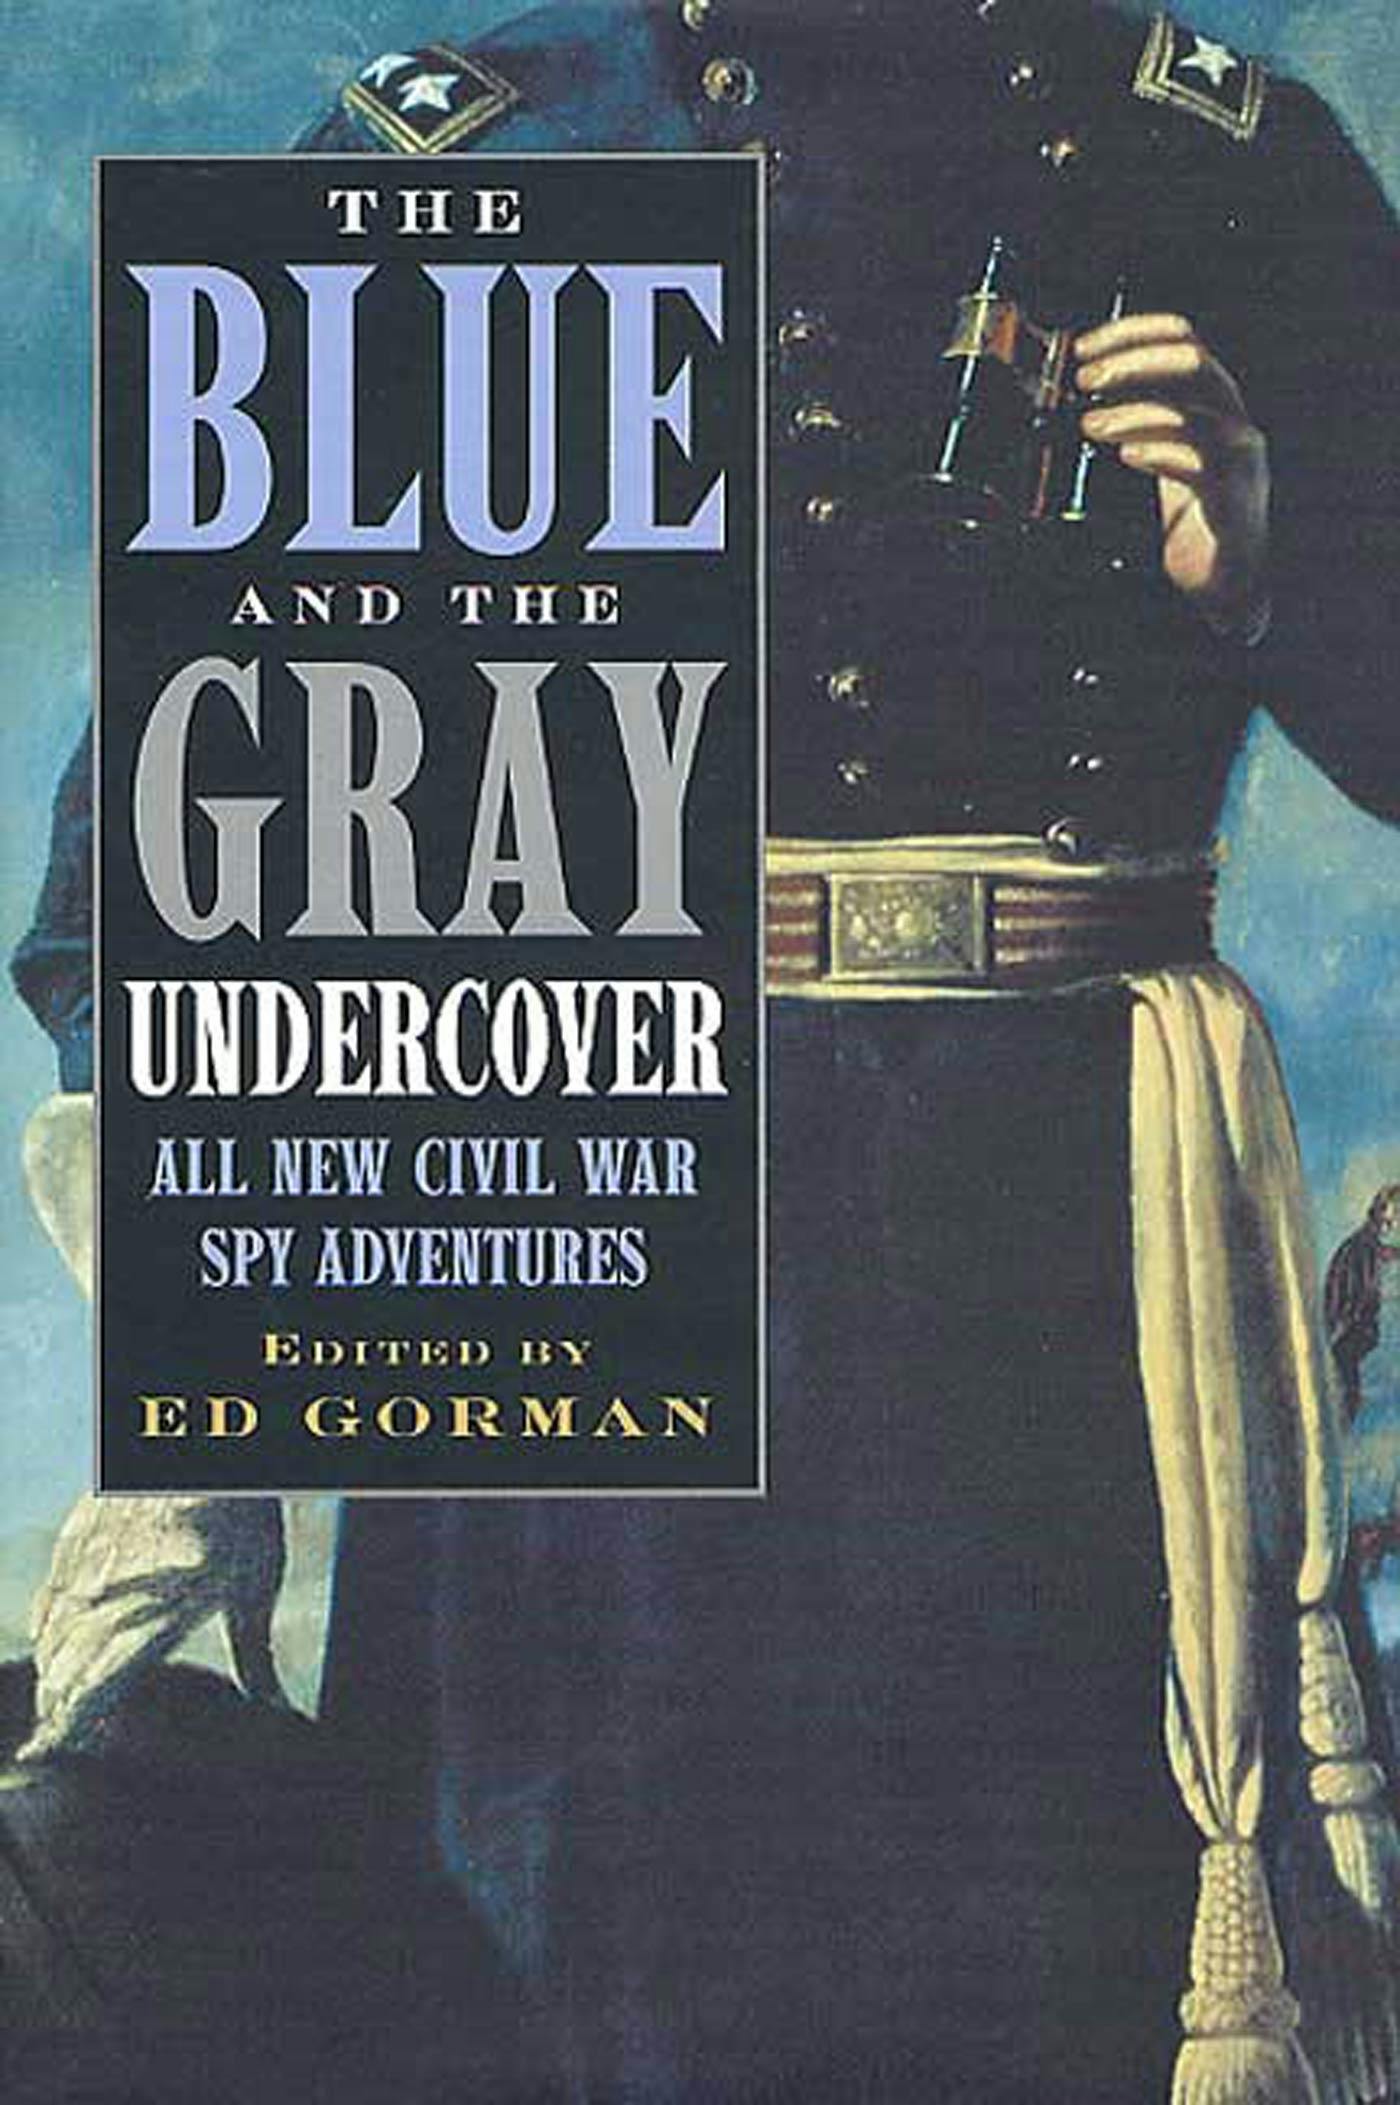 Cover for the book titled as: The Blue and the Gray Undercover